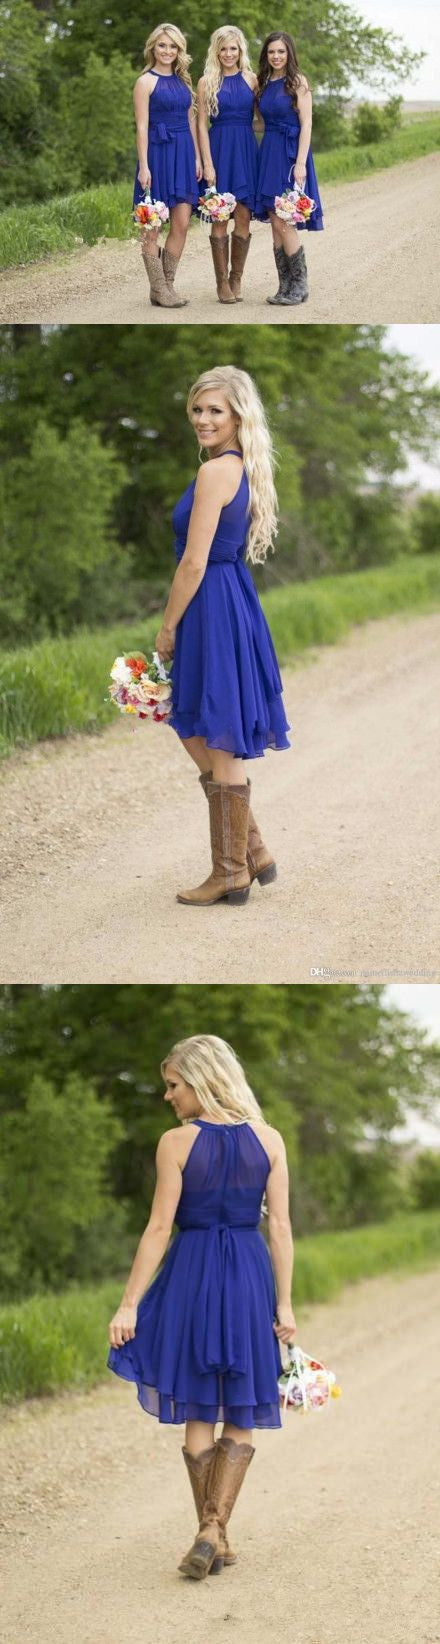 Royal Blue Country Short Rustic Bridesmaid Dresses with Cowboy Boots,FS071-Dolly Gown